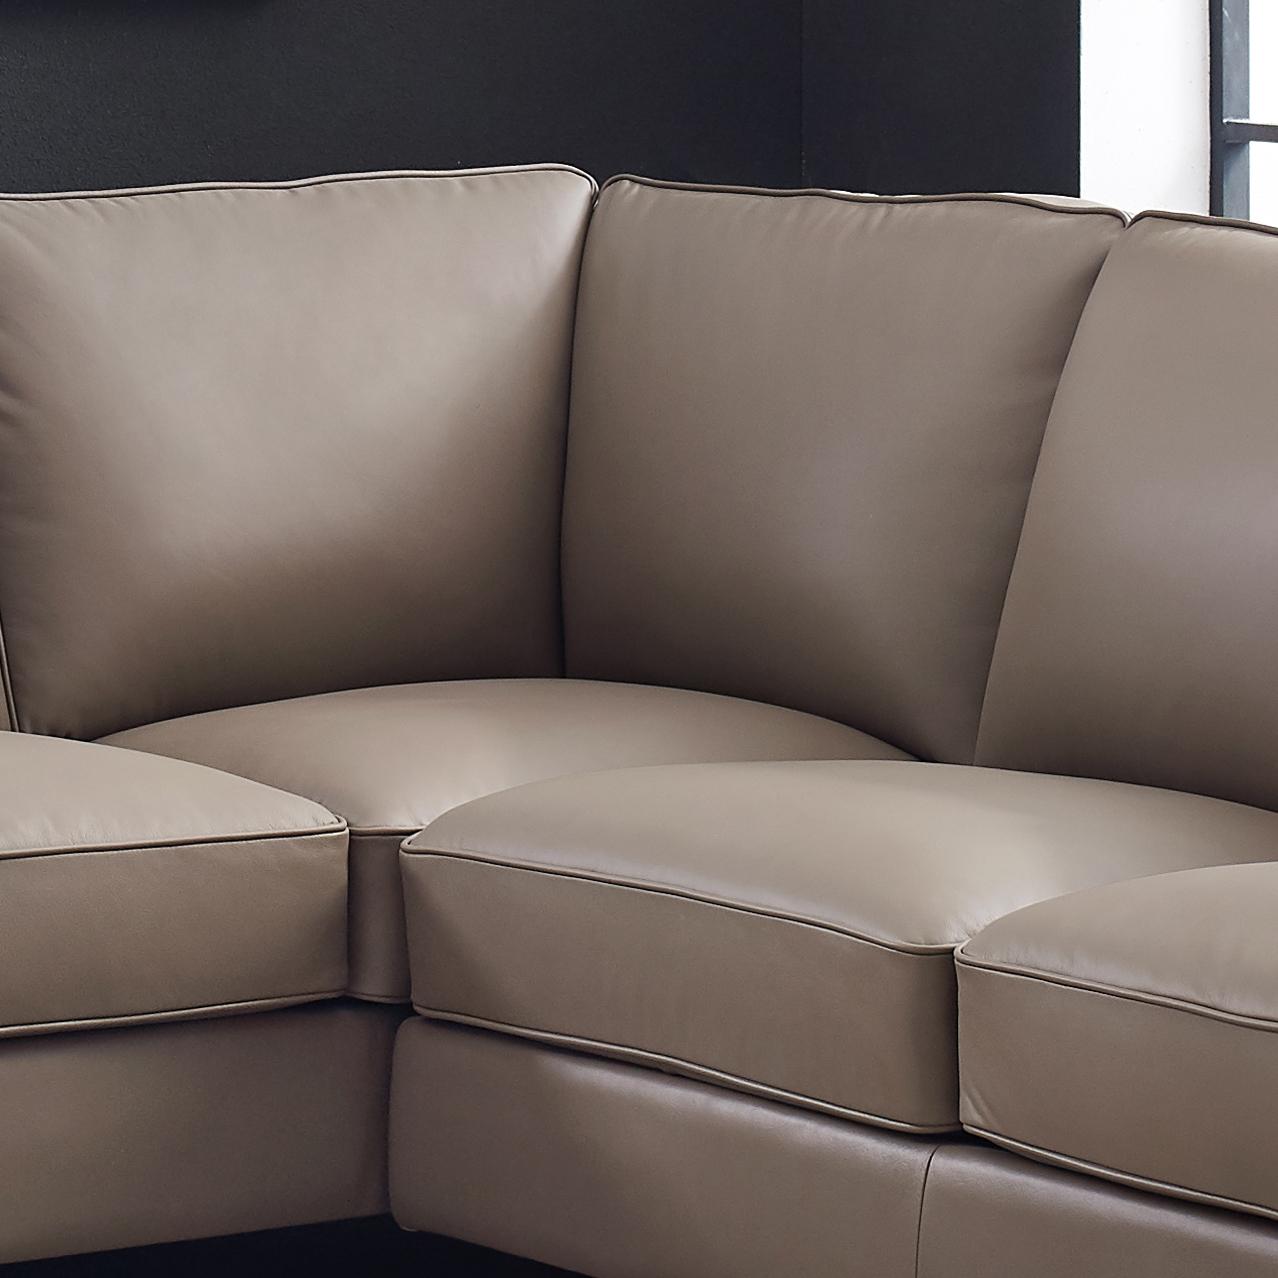 

    
Hydeline SAN FRANCISCO-6571SECT2518 Sectional Sofa Taupe SAN FRANCISCO-6571SECT2518
